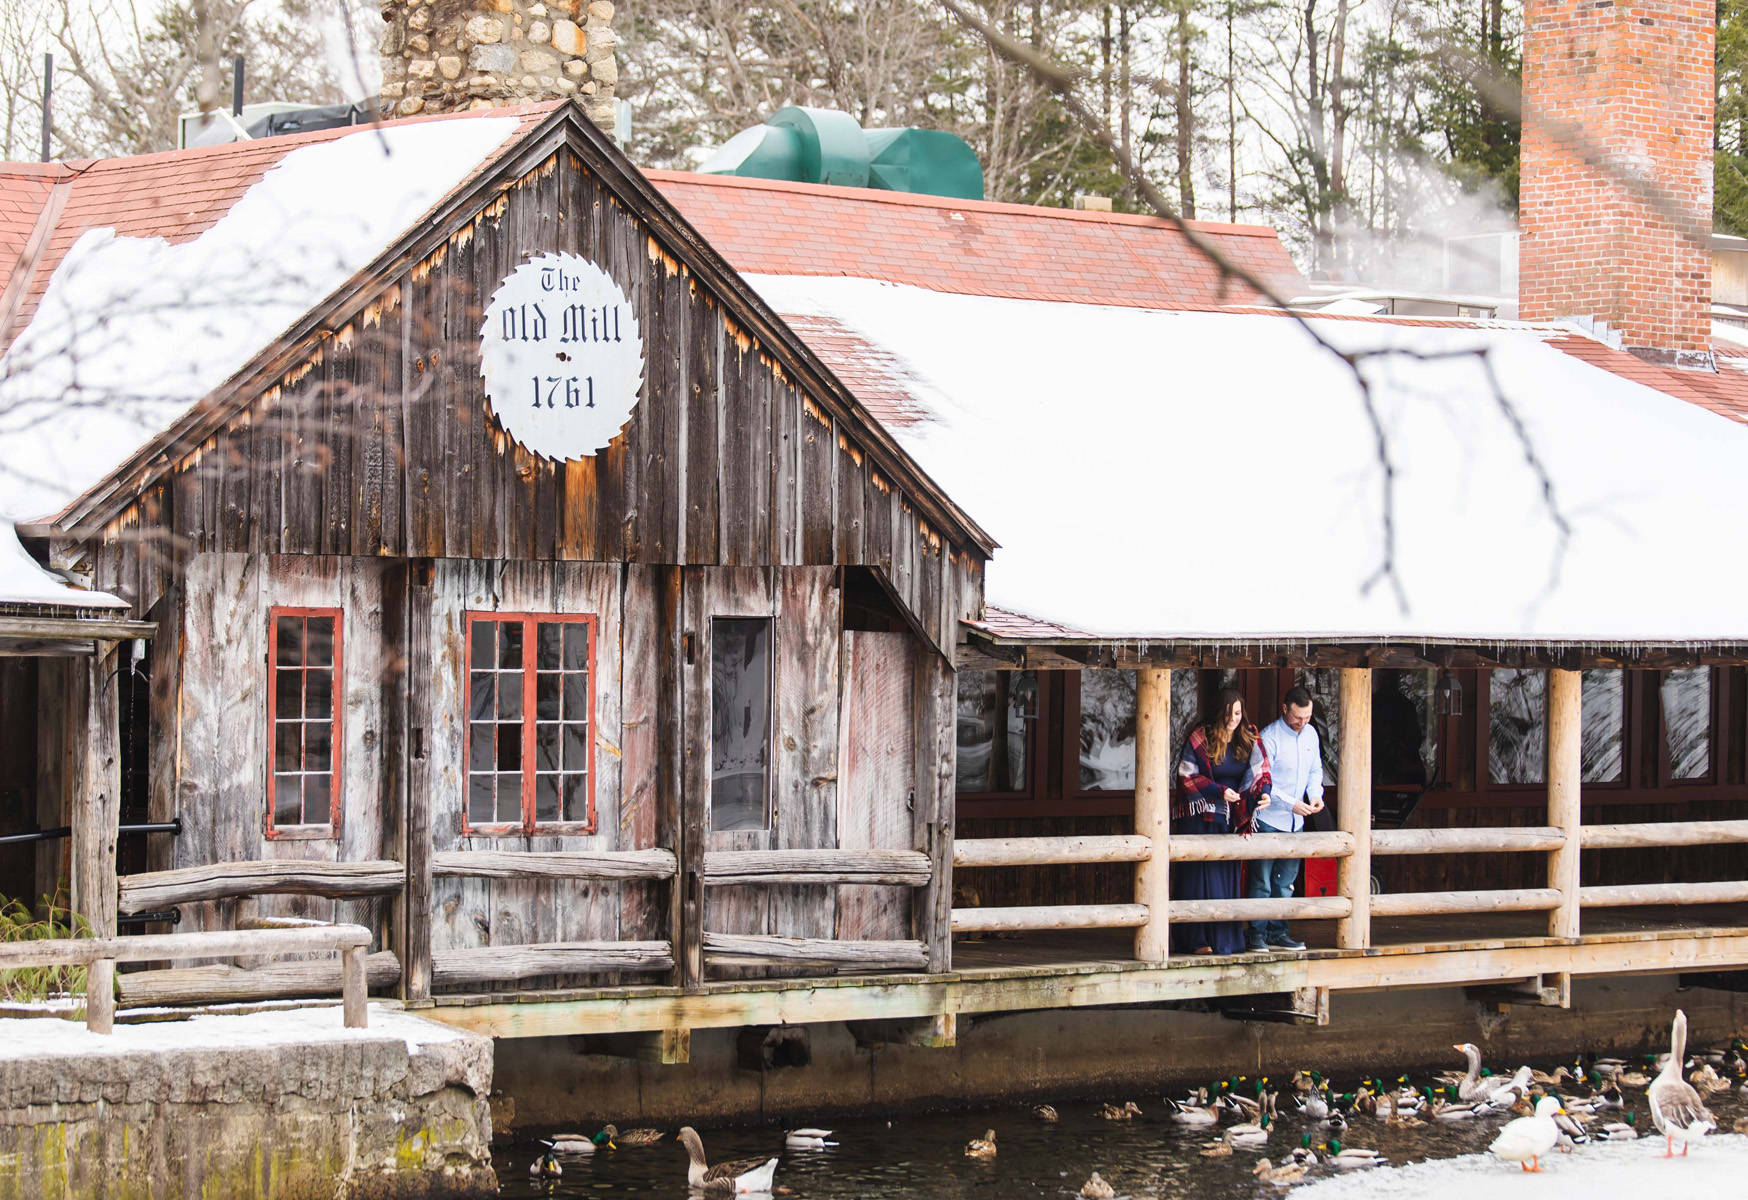 Picturesque View Of Old Mill Restaurant In Massachusetts